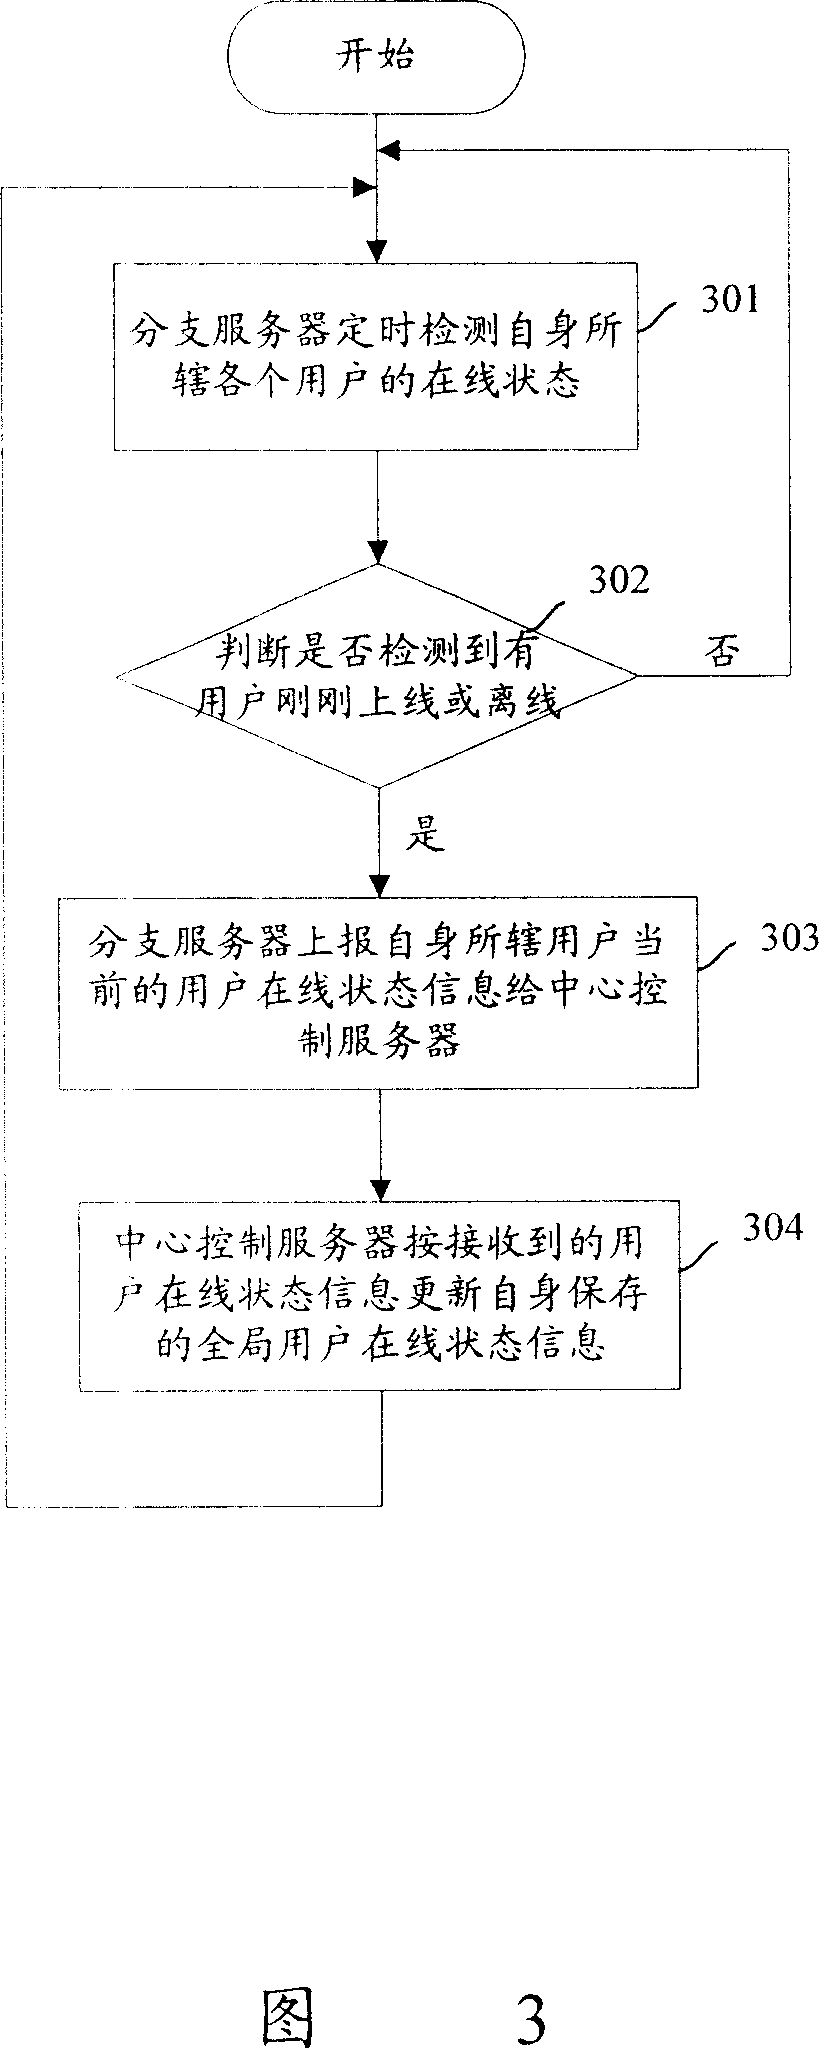 A data synchronization method and system based on distribution